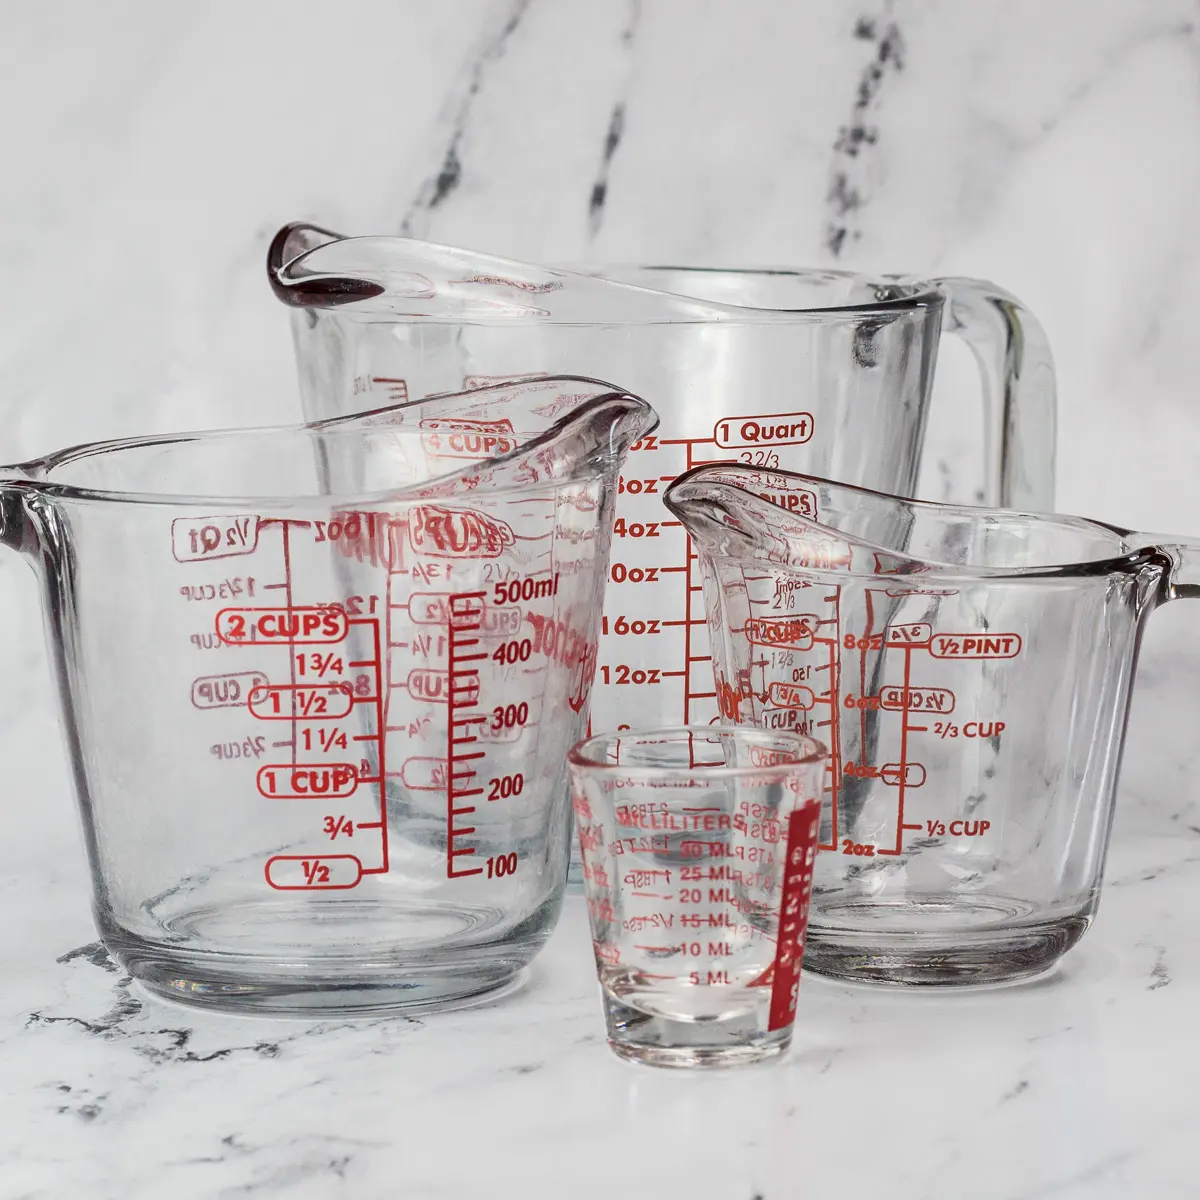 Liquid measuring cup sizes showing ounces in a quart.